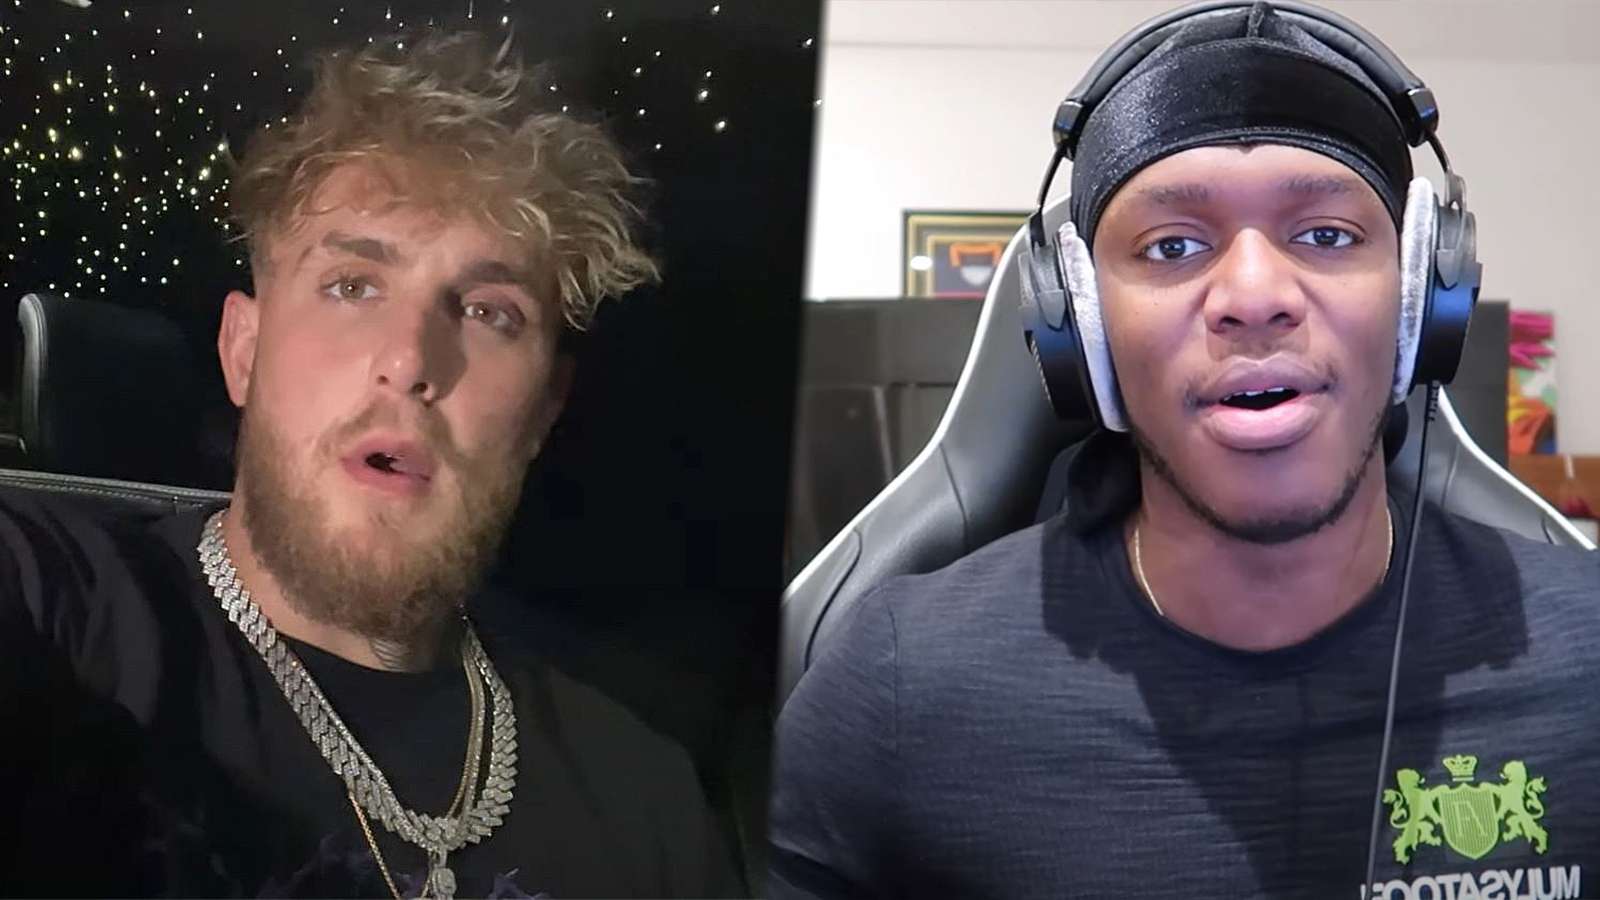 Jake Paul claims KSI is scared to fight him